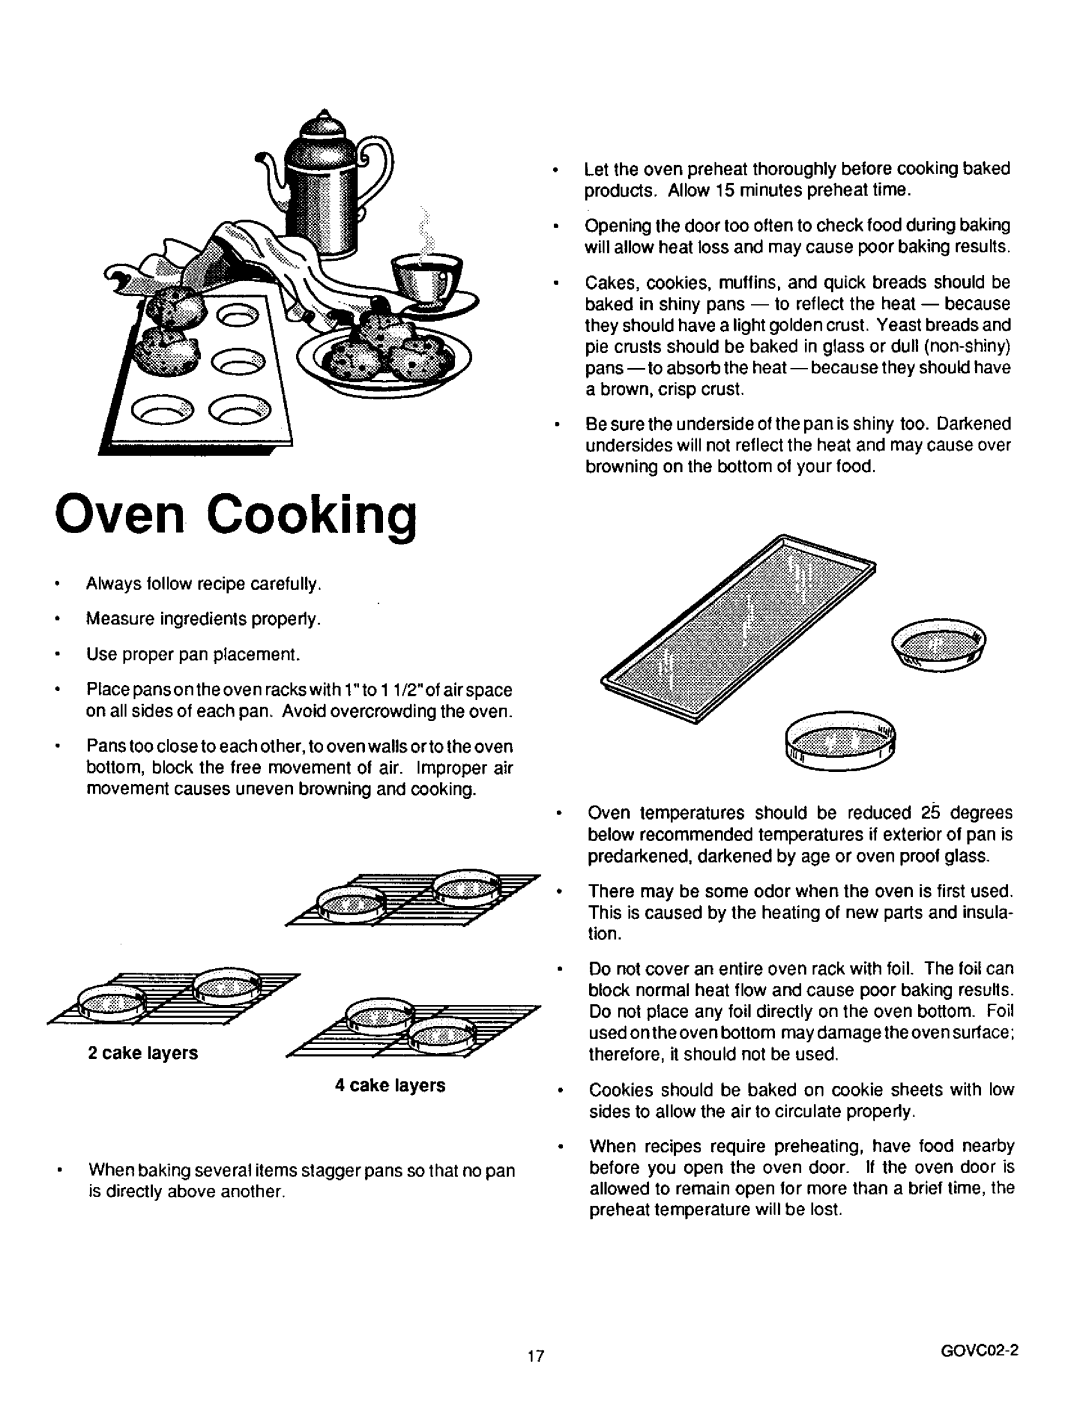 Sears 36519, 36511 owner manual Oven Cooking, Cake layers 